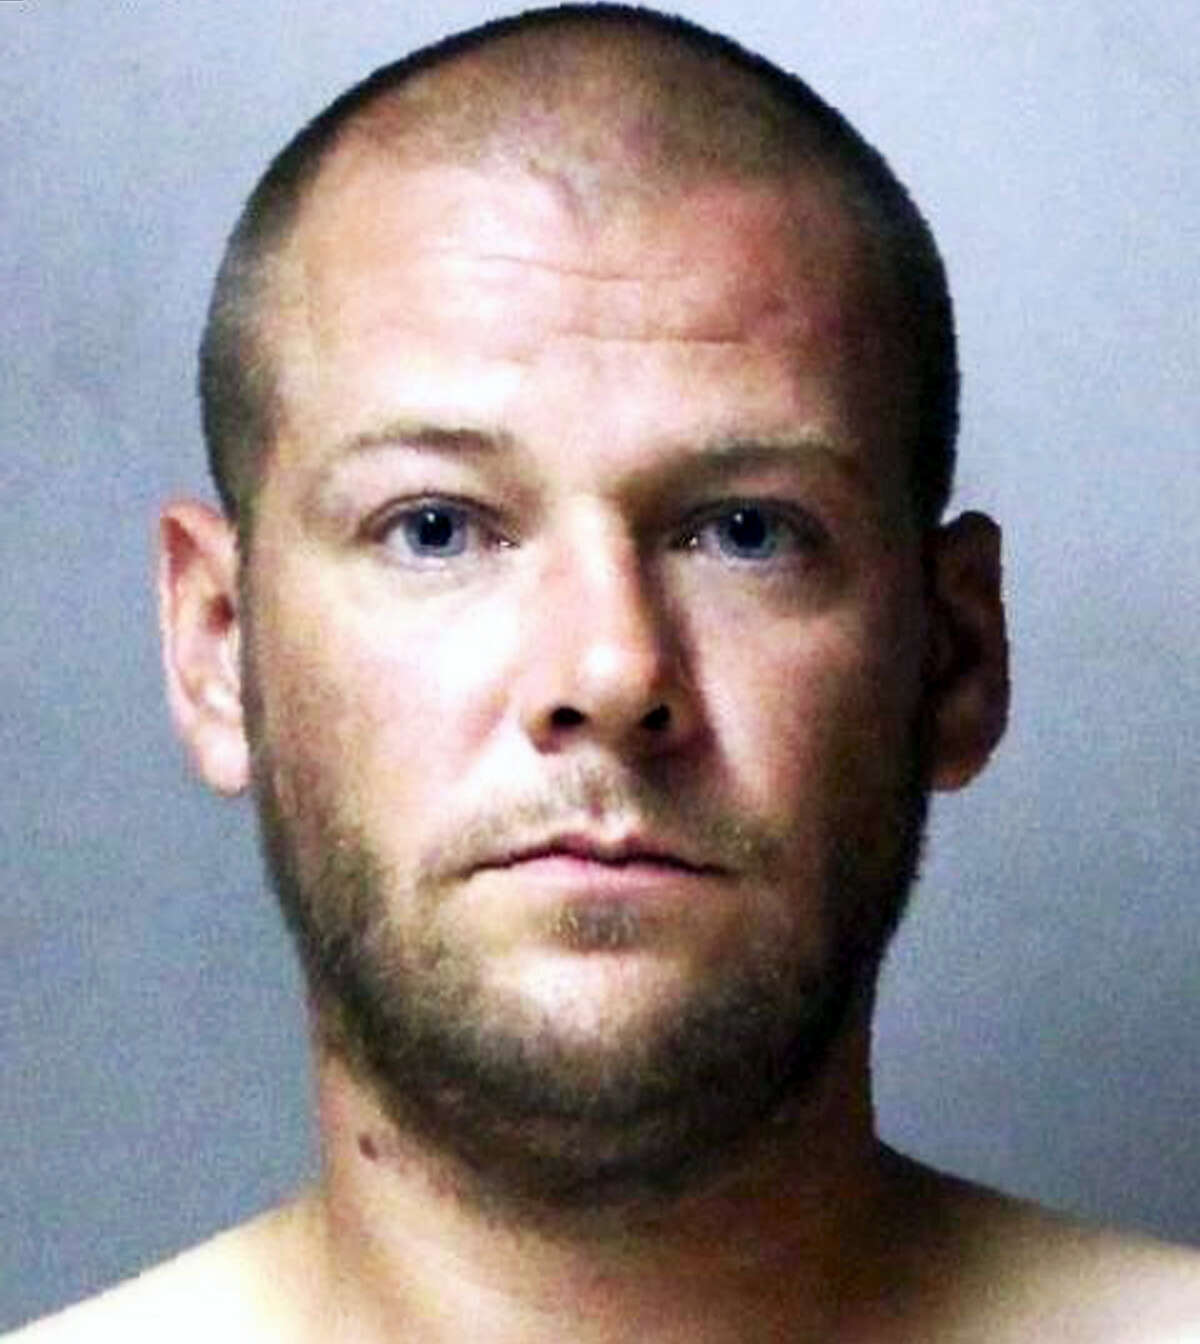 This photo provided by the New York State Police shows Justin Walters, a U.S. Army soldier who is charged with killing his wife and fatally shooting Trooper Joel Davis on Sunday, July 9, 2017. Davis was responding to reports of shots fired at the Walters’ rural upstate property in Theresa, N.Y., authorities said Monday, July 10. (New York State Police via AP)